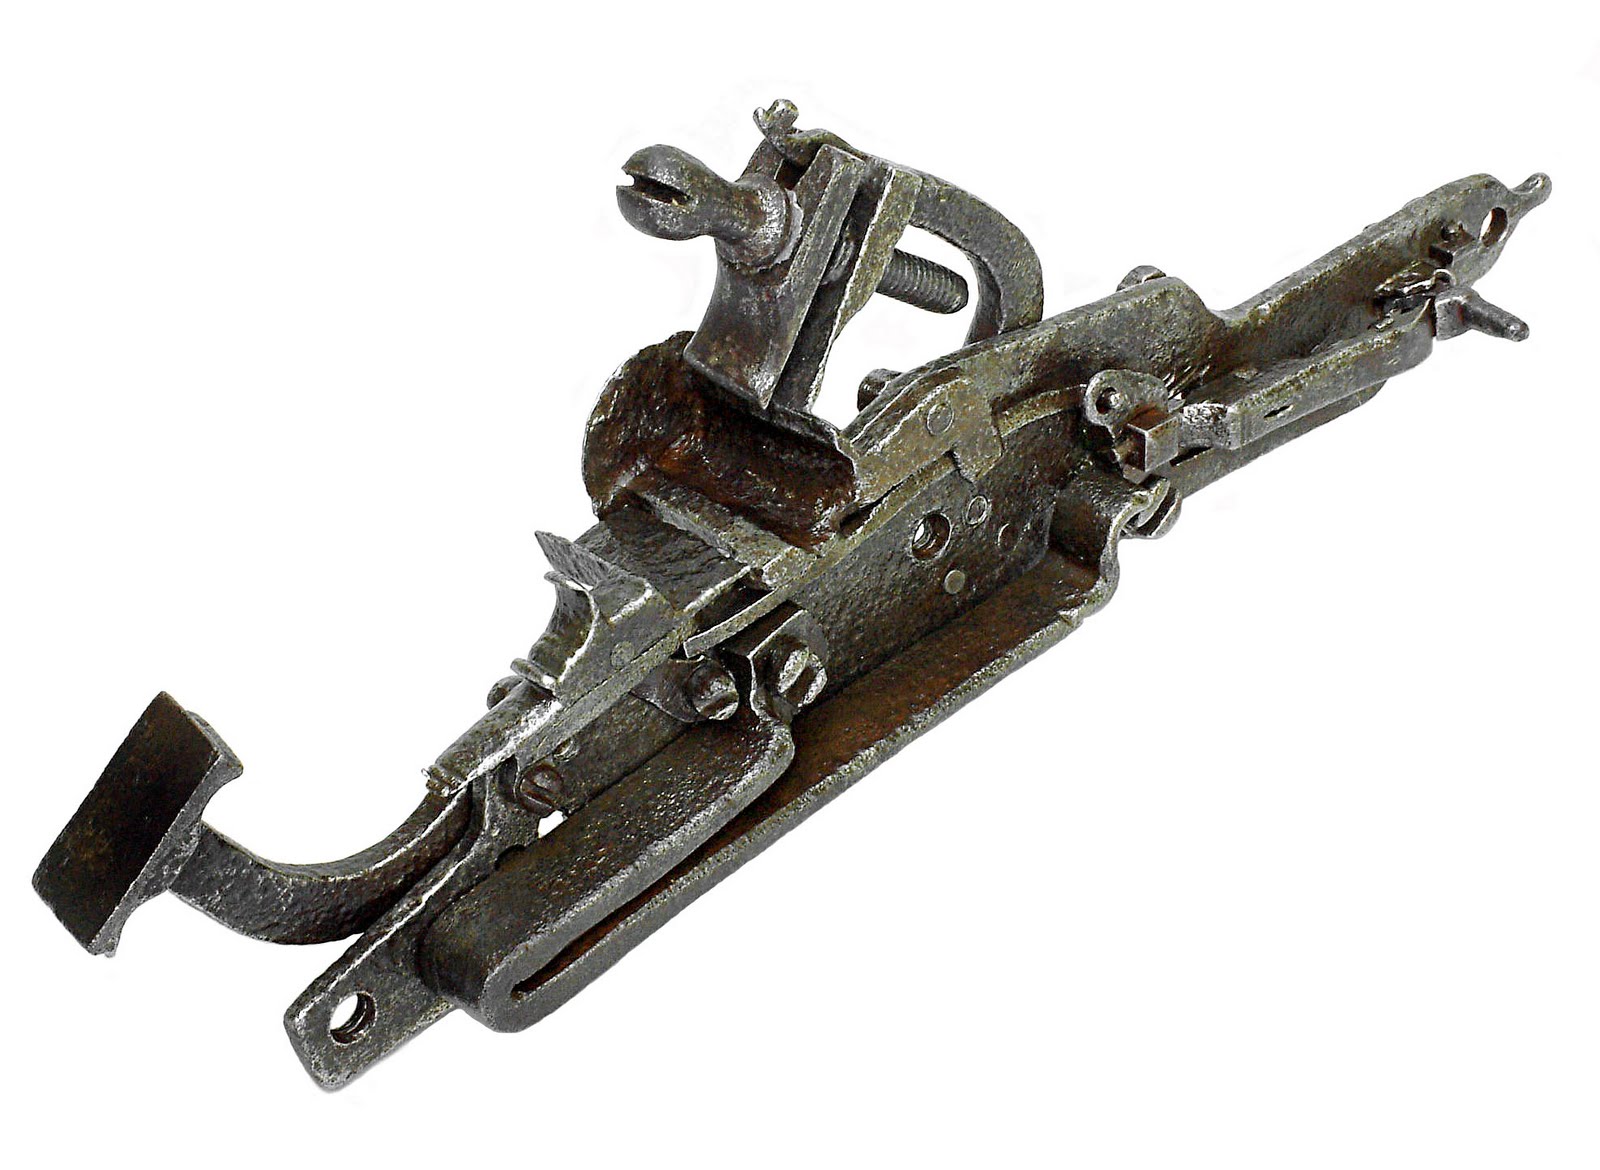 Contemporary Makers Early English Flintlock Mechanisms